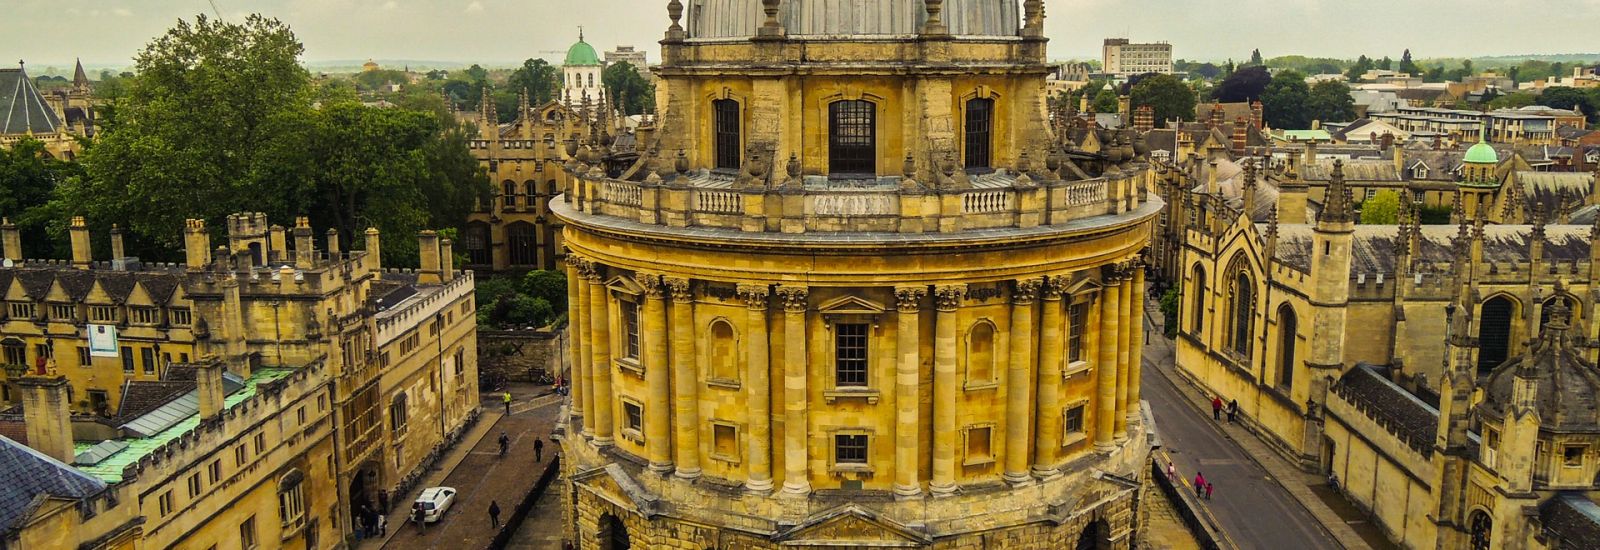 Image of the Radcliffe Camera building; part of the University of Oxford